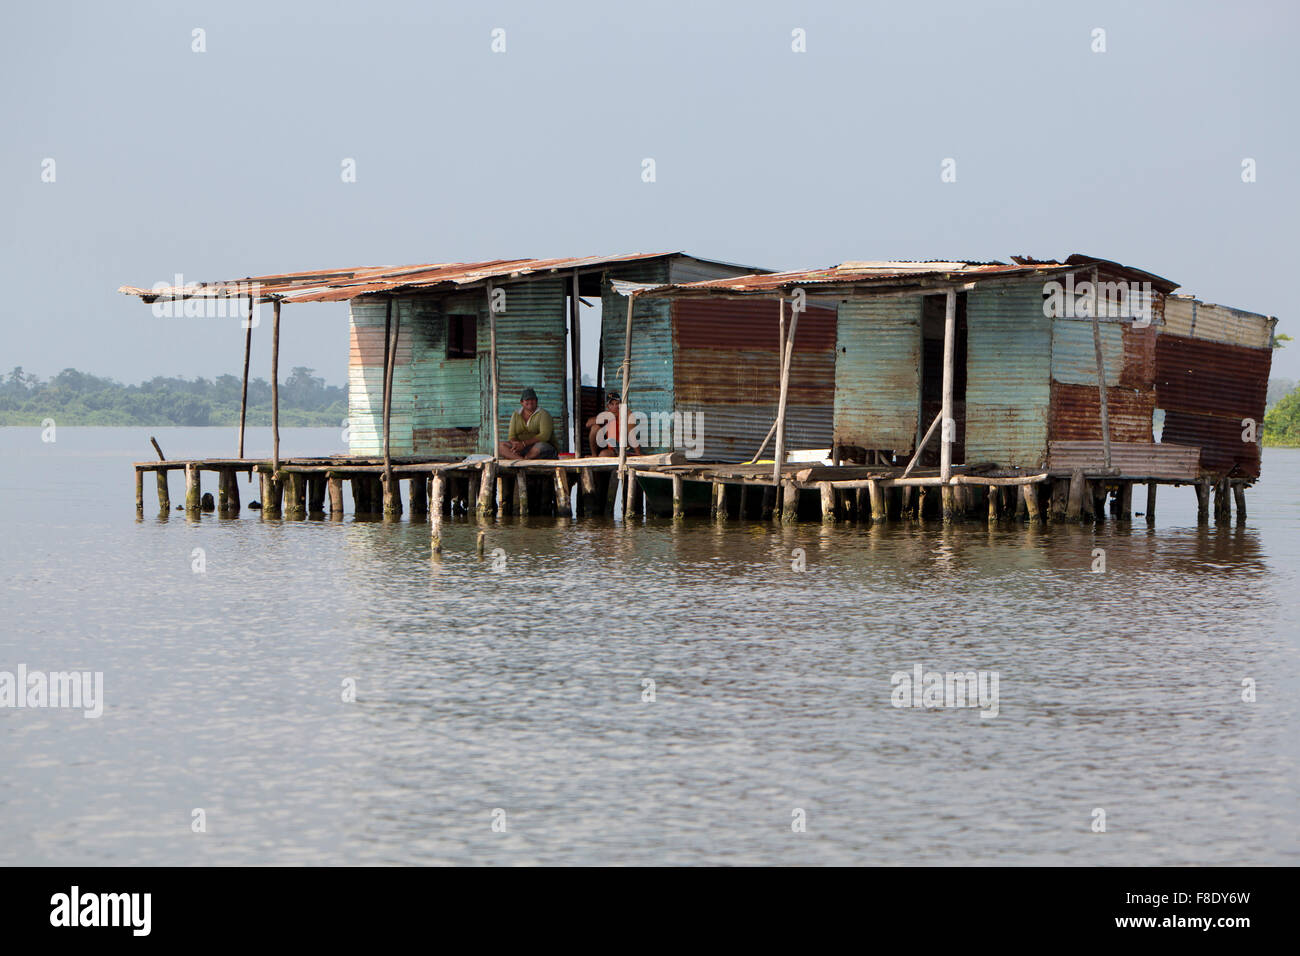 Fisher men sitting in poor wooden houses lifted up on Maracaibo Lake, Venezuela Stock Photo